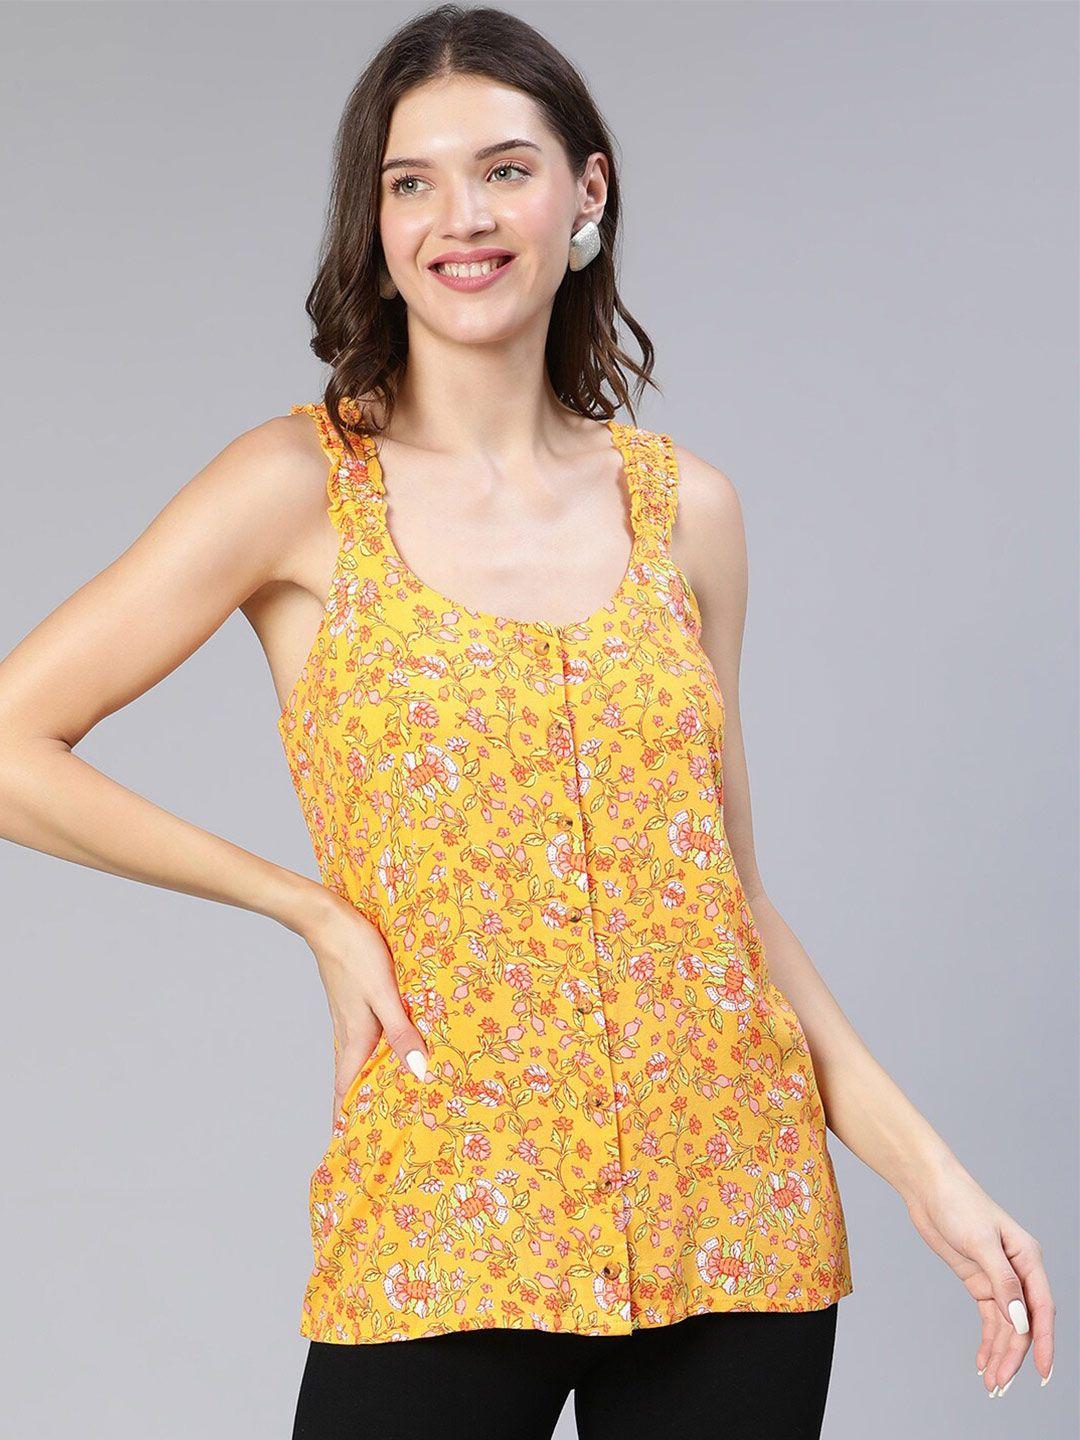 oxolloxo floral print crepe top